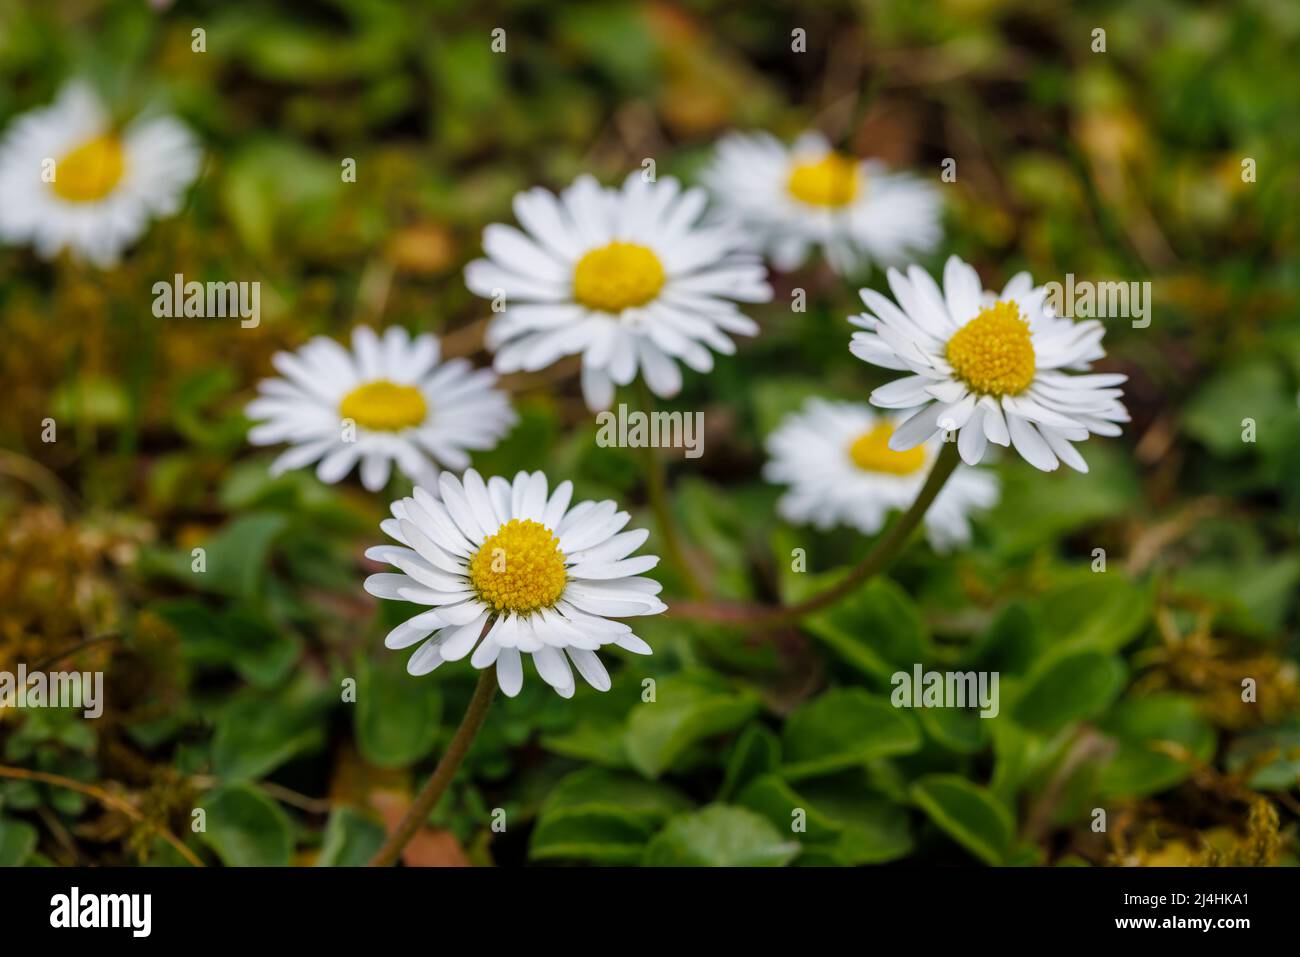 Lawn daisy (Bellis perennis), also common daisy or English daisy, a lawn weed, flowering in early spring in a garden in Surrey, south-east England Stock Photo